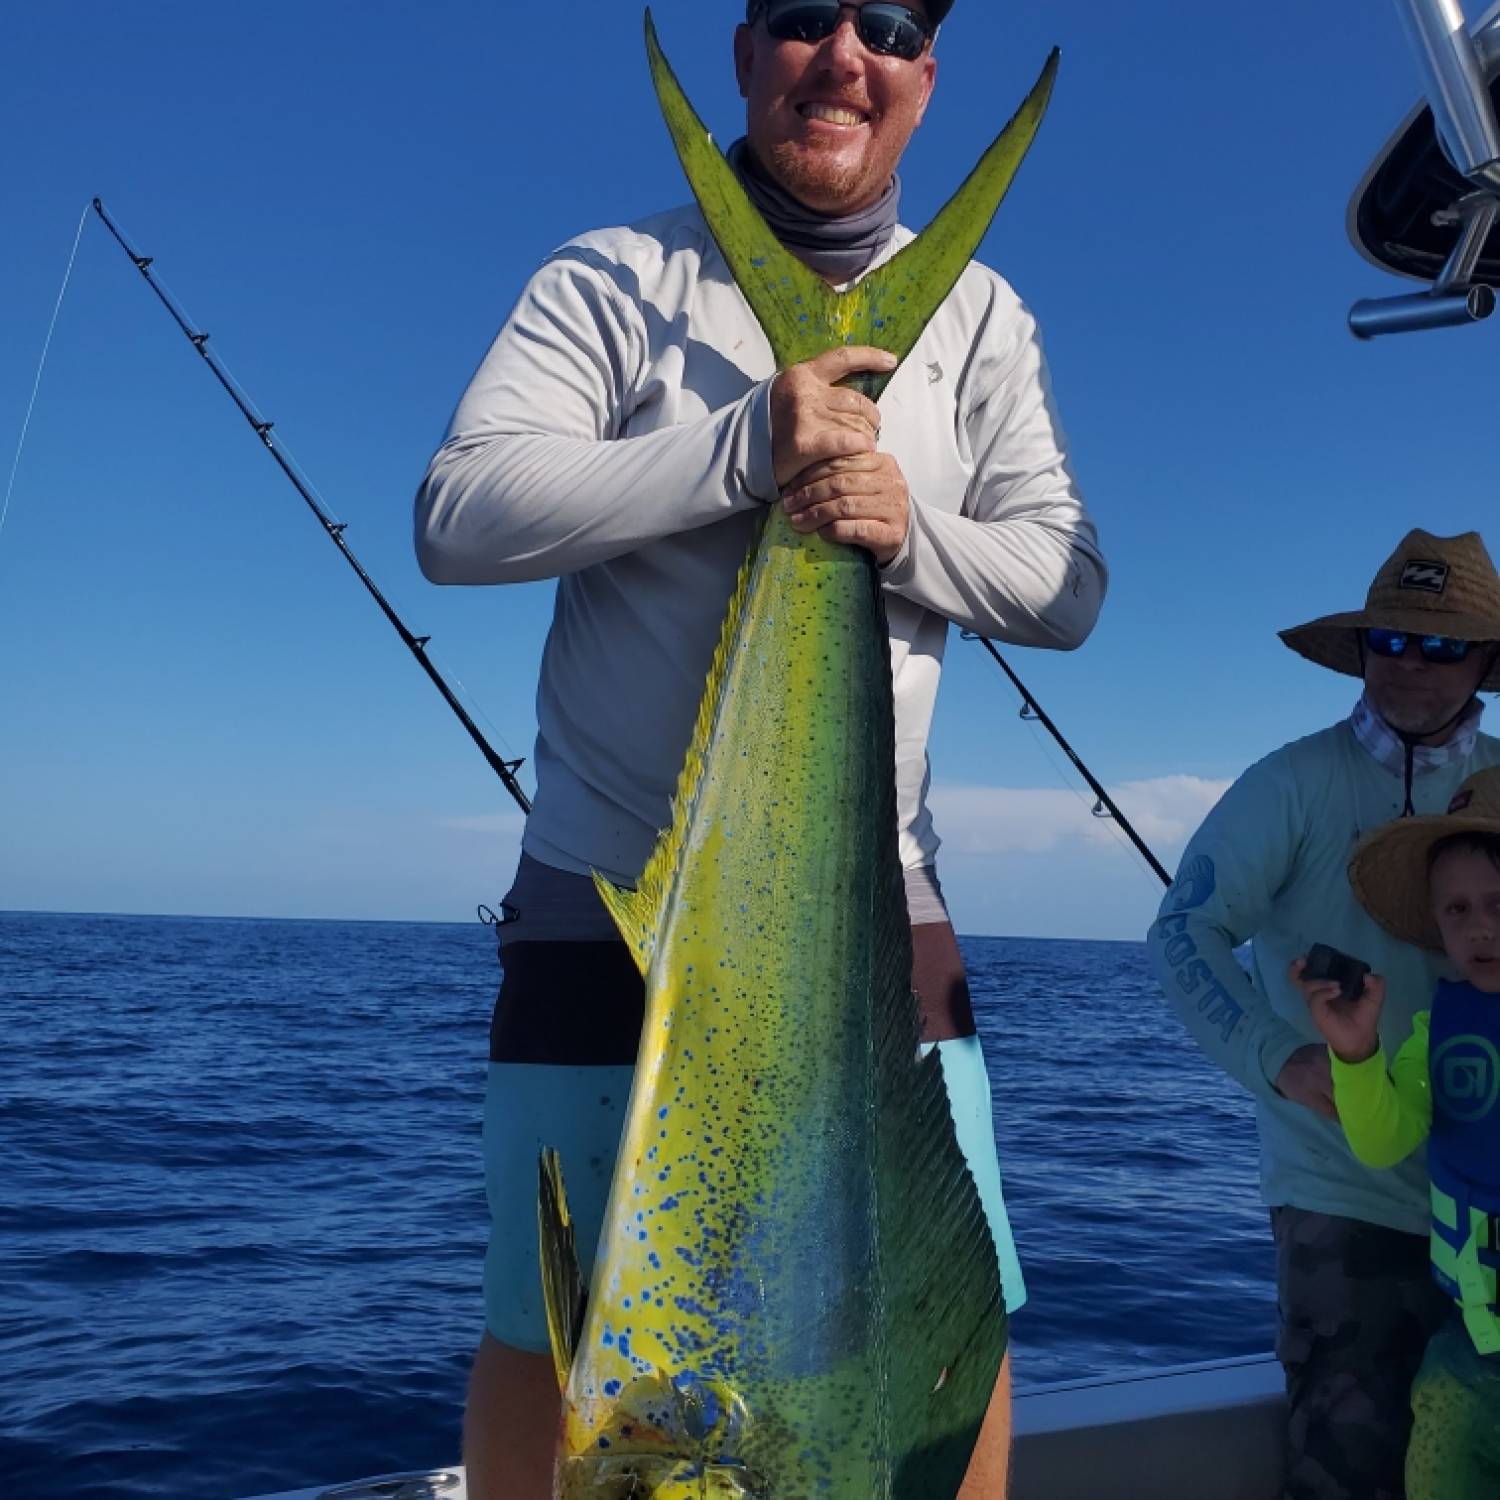 Title: First mahi on the 247 masters - On board their Sportsman Masters 247 Bay Boat - Location: American shouls. Participating in the Photo Contest #SportsmanAugust2021